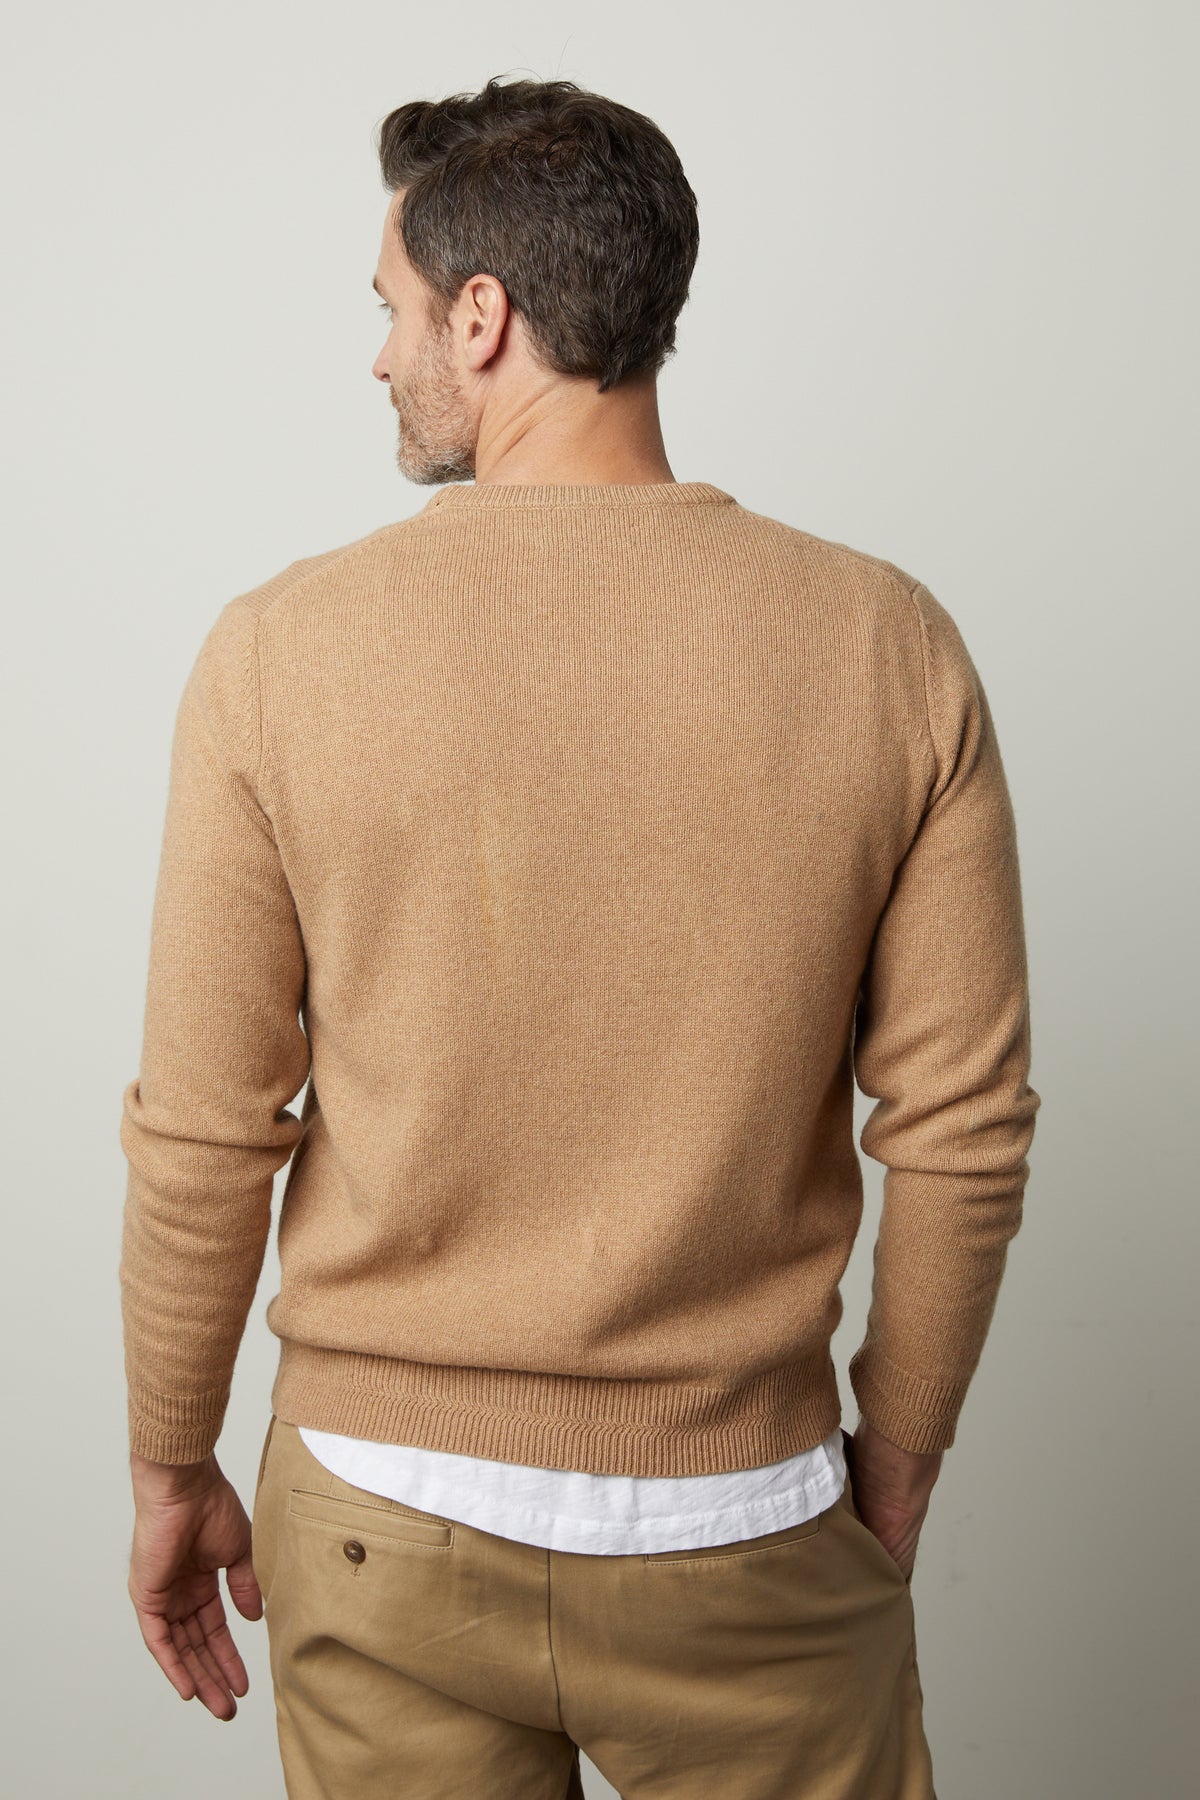 The stylish back view of a man wearing a warm Velvet by Graham & Spencer DASHELL CREW NECK SWEATER.-35782497206465